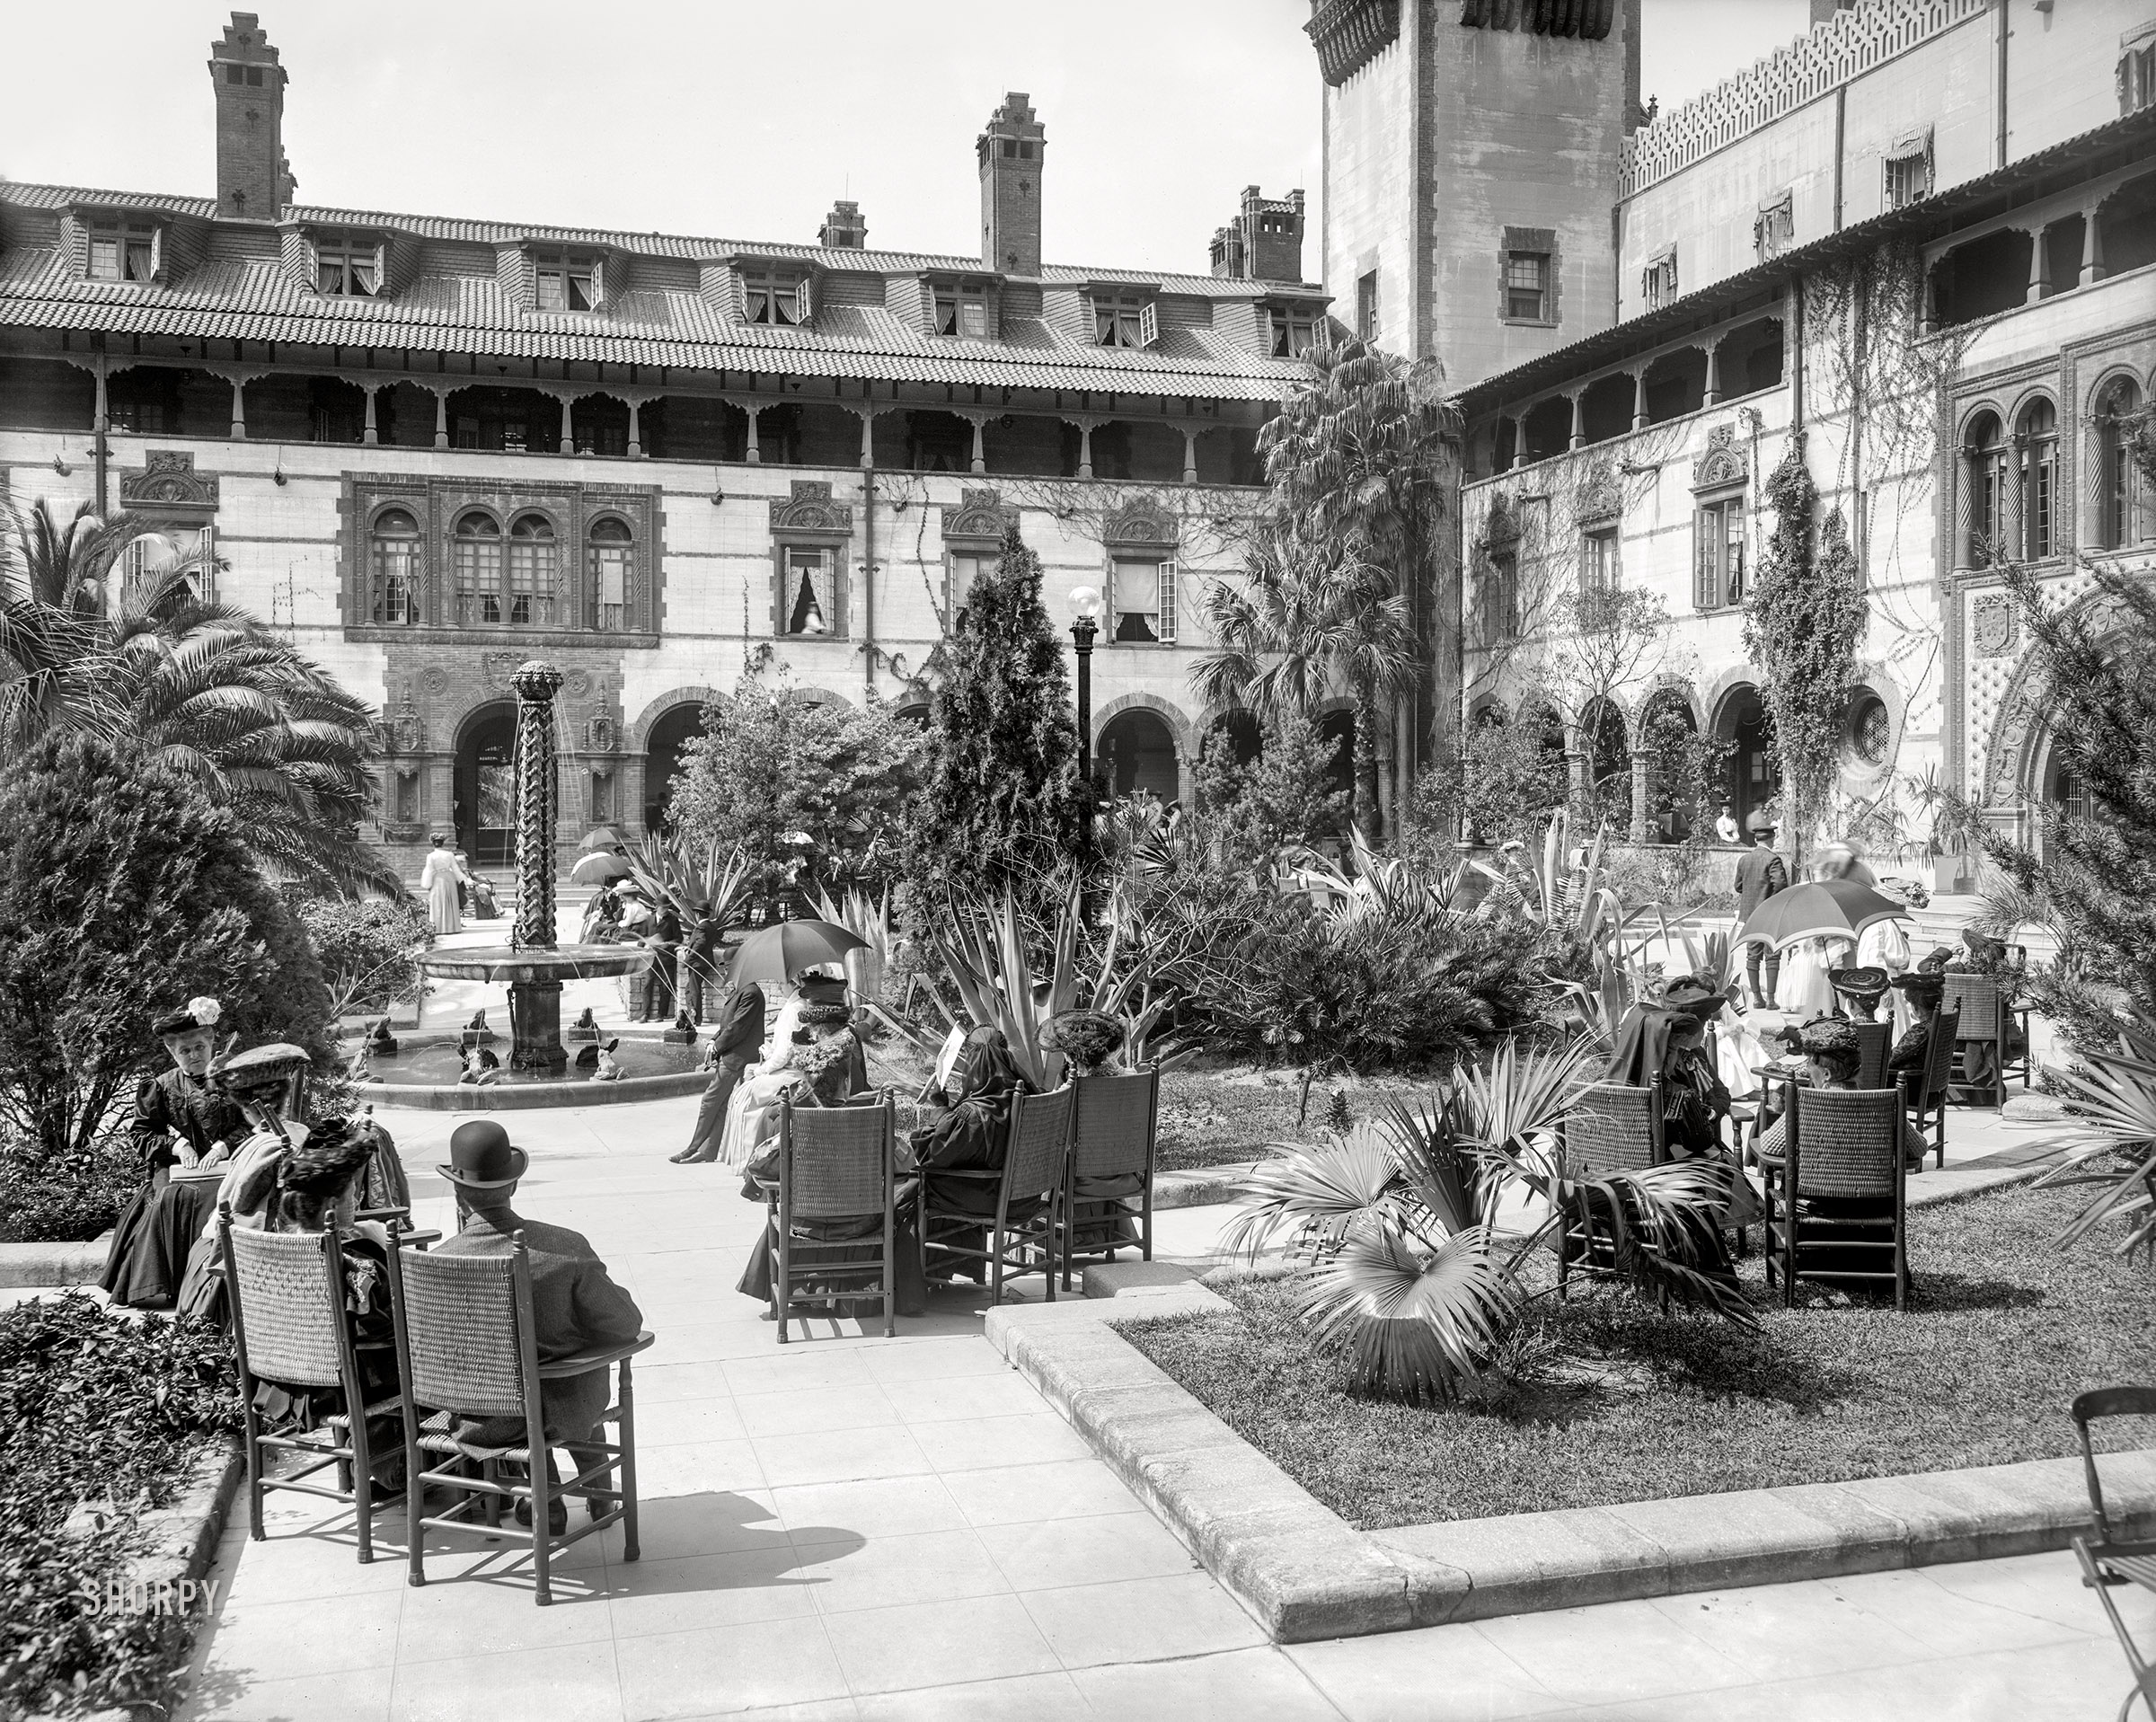 St. Augustine, Florida, circa 1905. "In the court of the Hotel Ponce de Leon." 8x10 inch dry plate glass negative, Detroit Photographic Company. View full size.